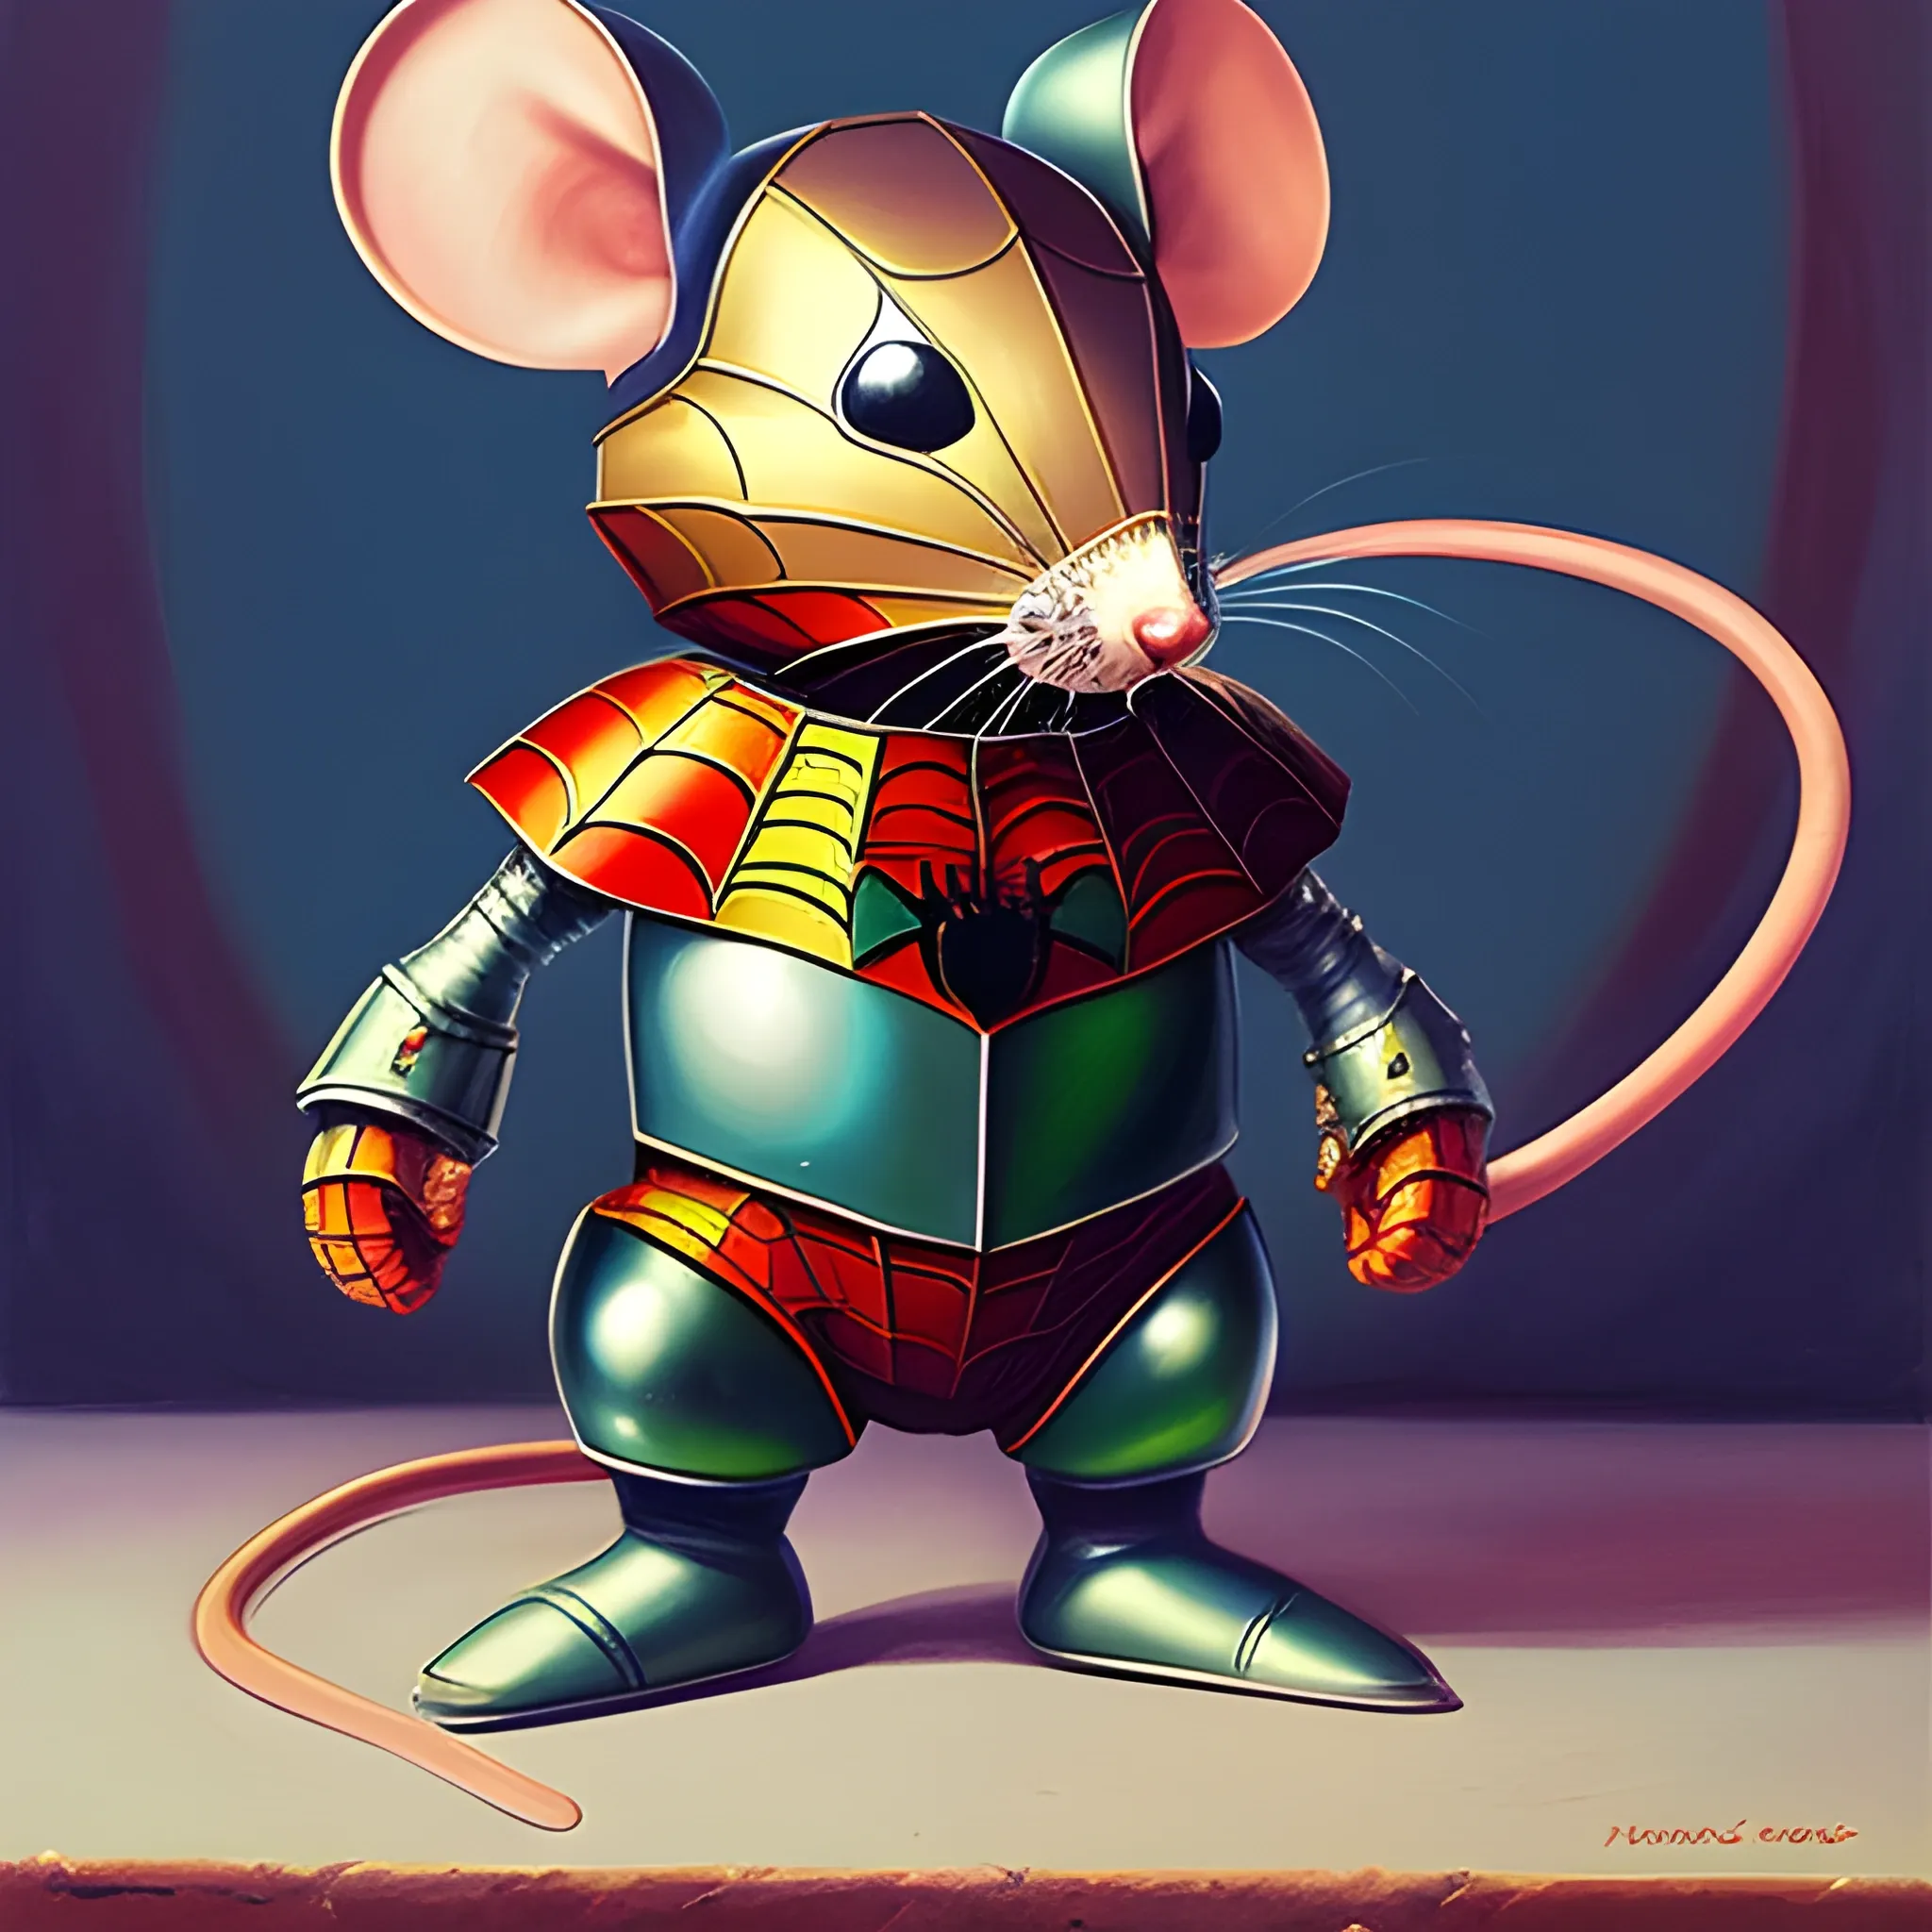 General Mouse is wearing armor. , Oil Painting, Trippy，Just like Spider Man